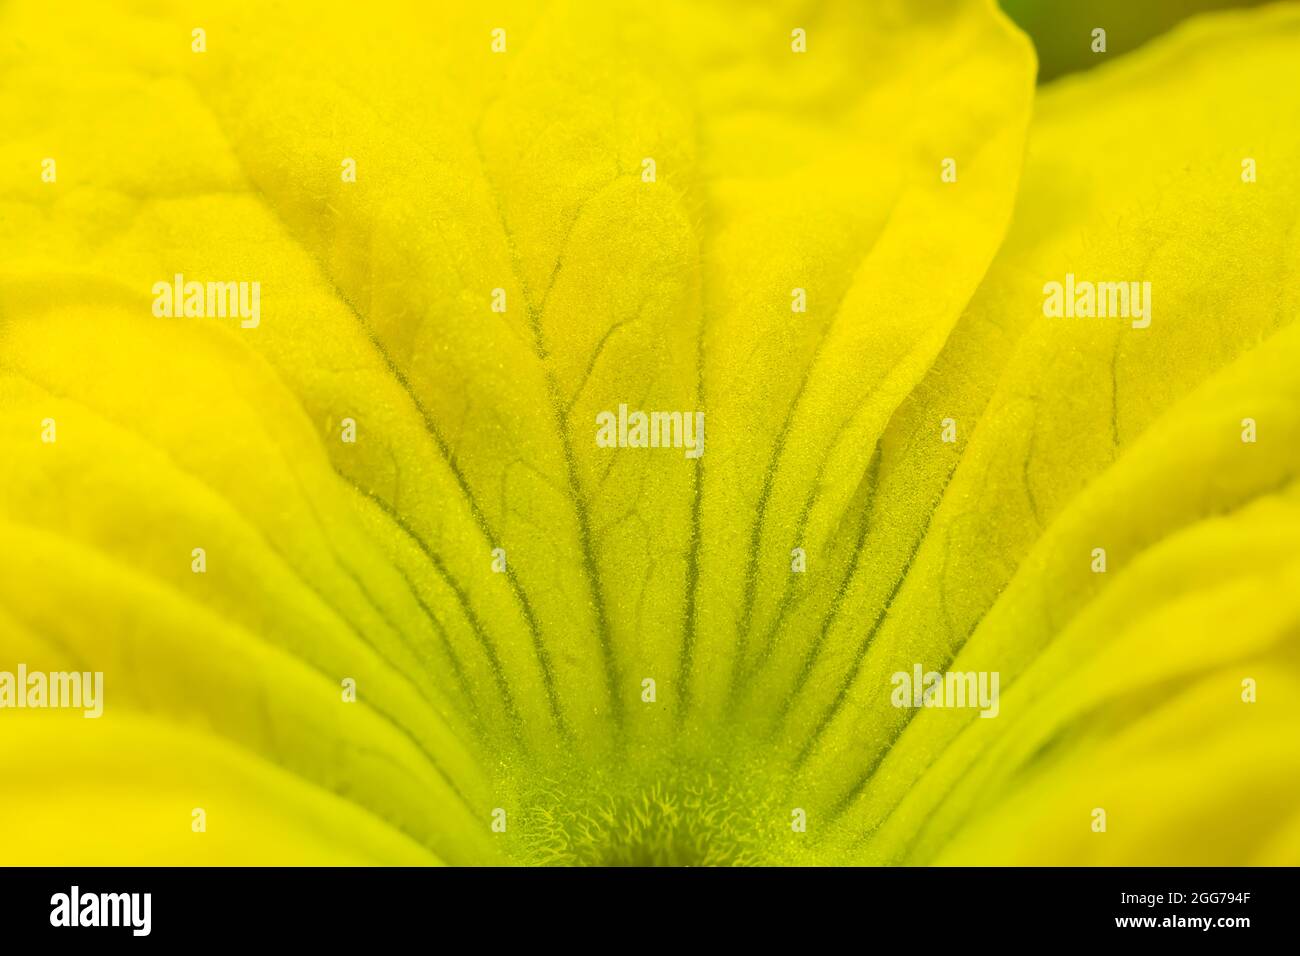 Yellow colored fresh melon flower abstract close up of petals with natural patterns. Used selective focus. Stock Photo